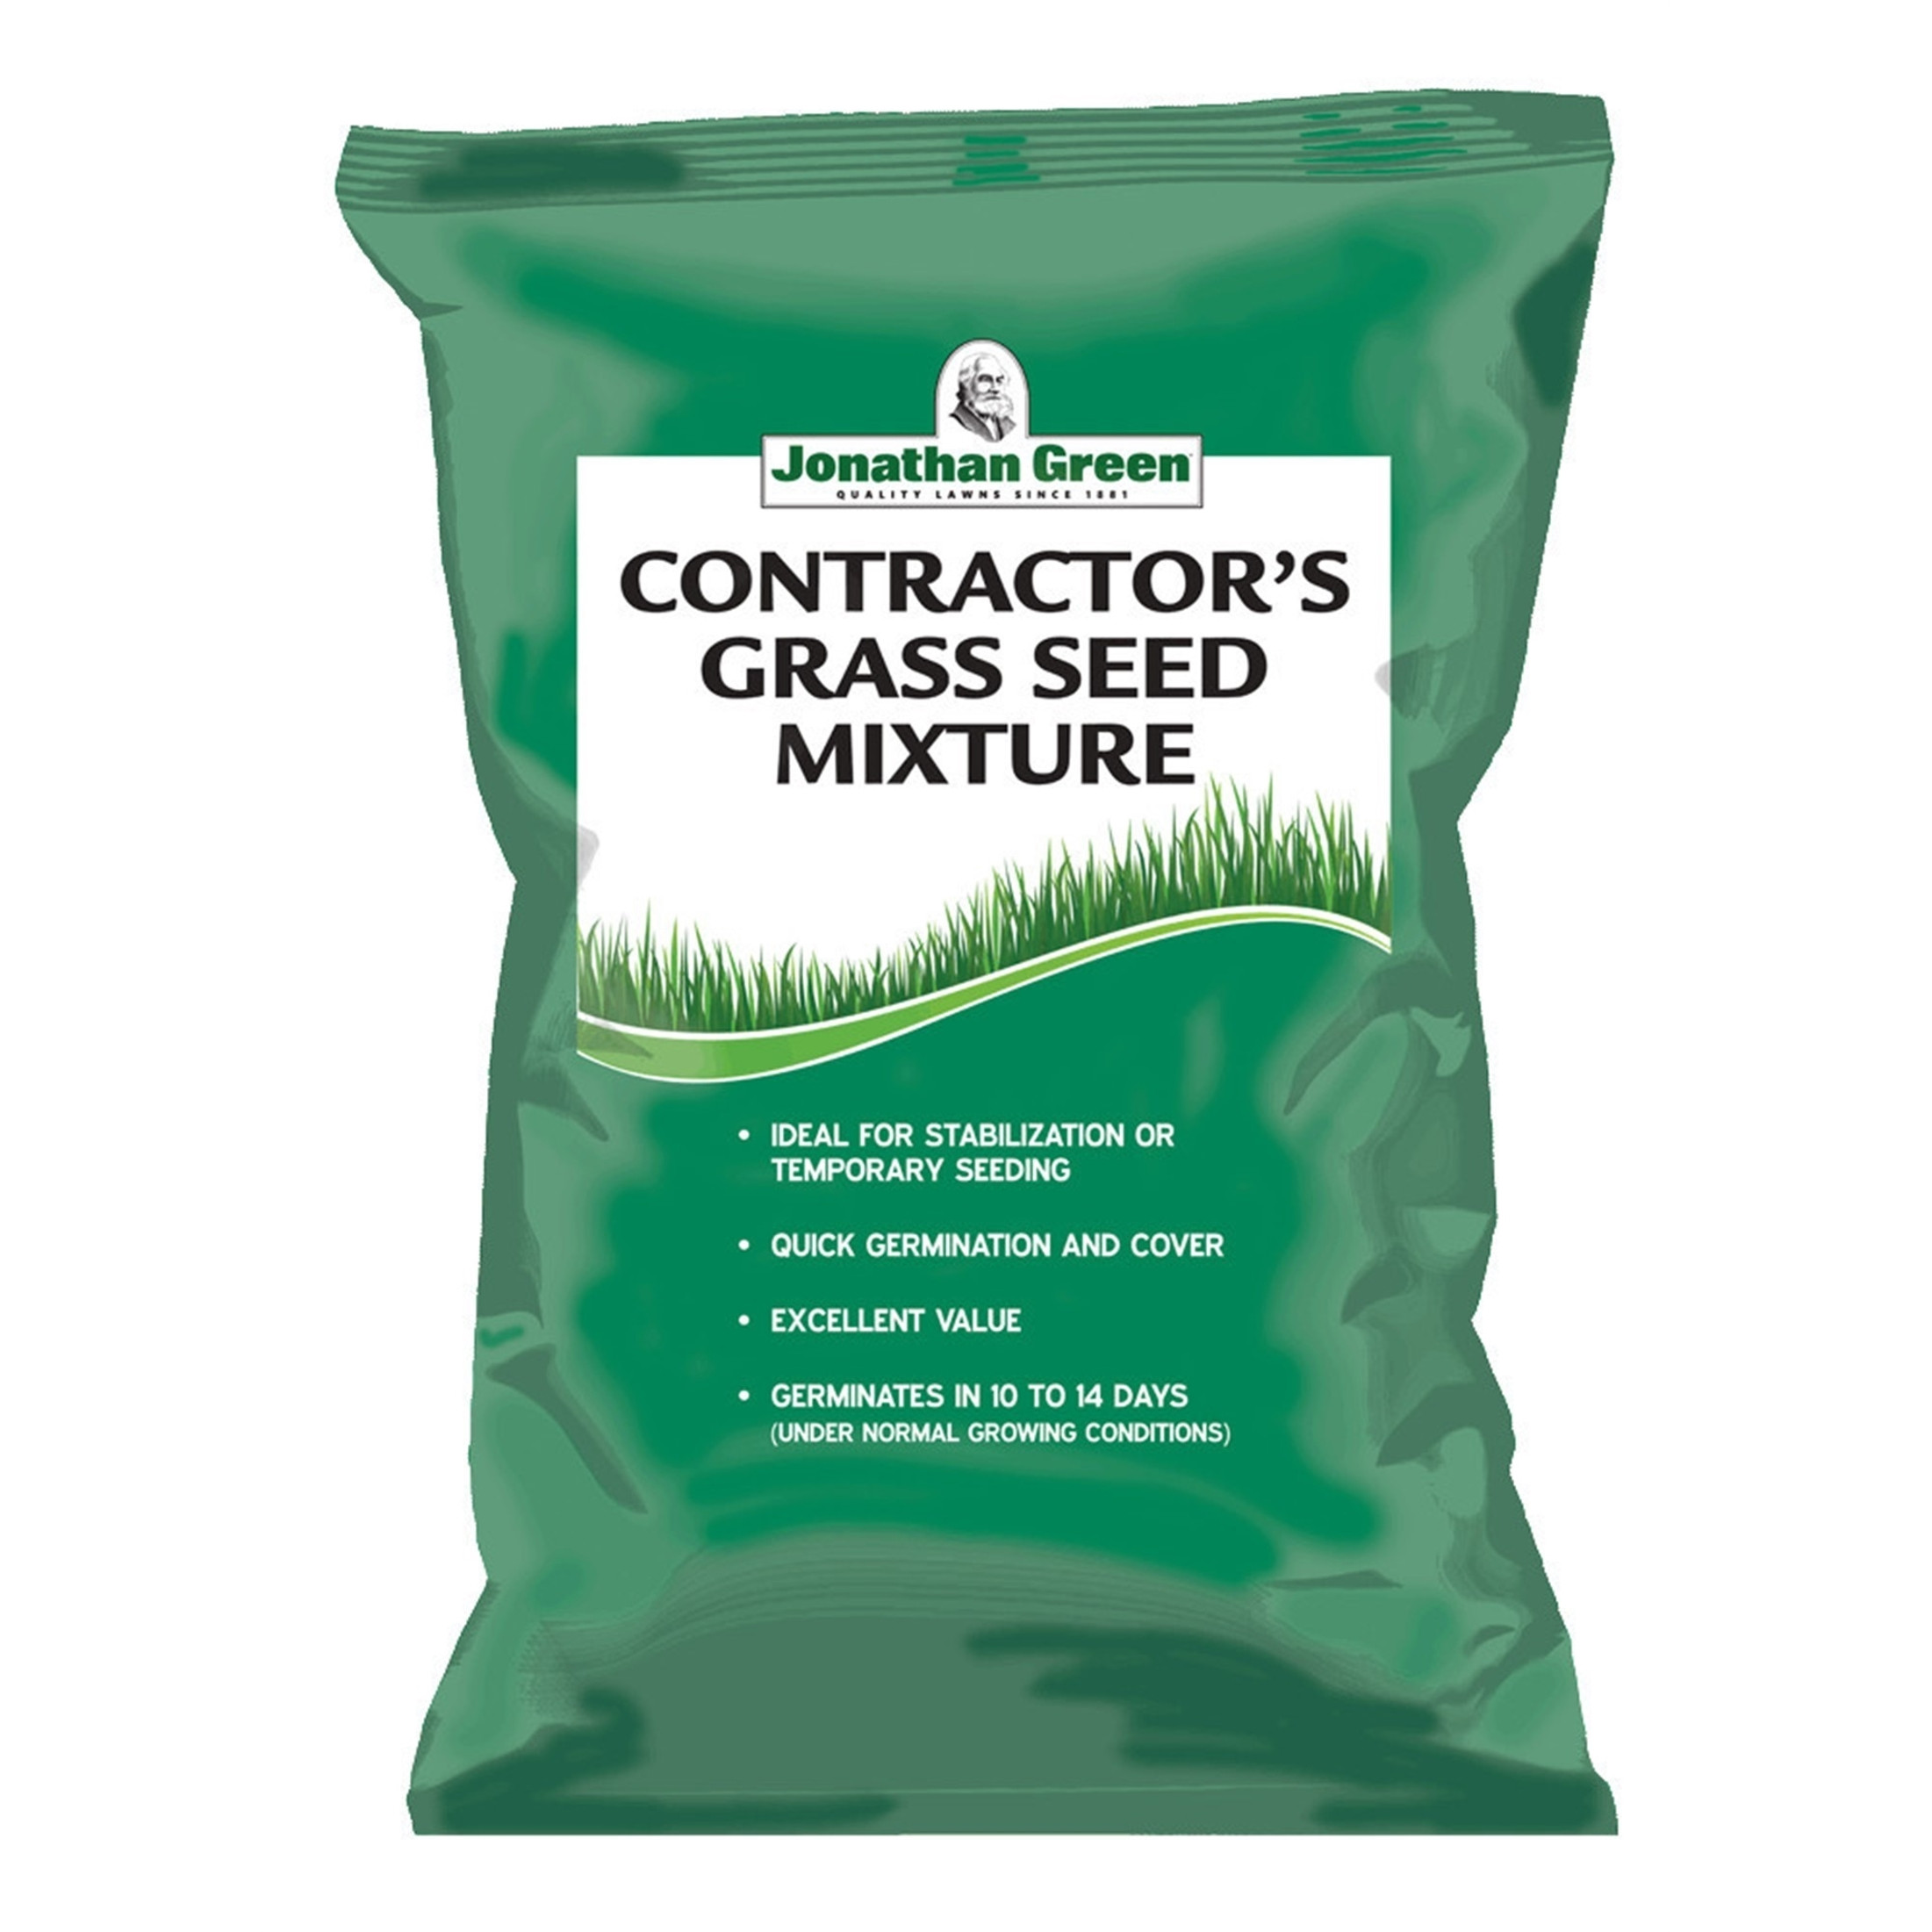 Jonathan Green Contractor's Grass Seed Mix